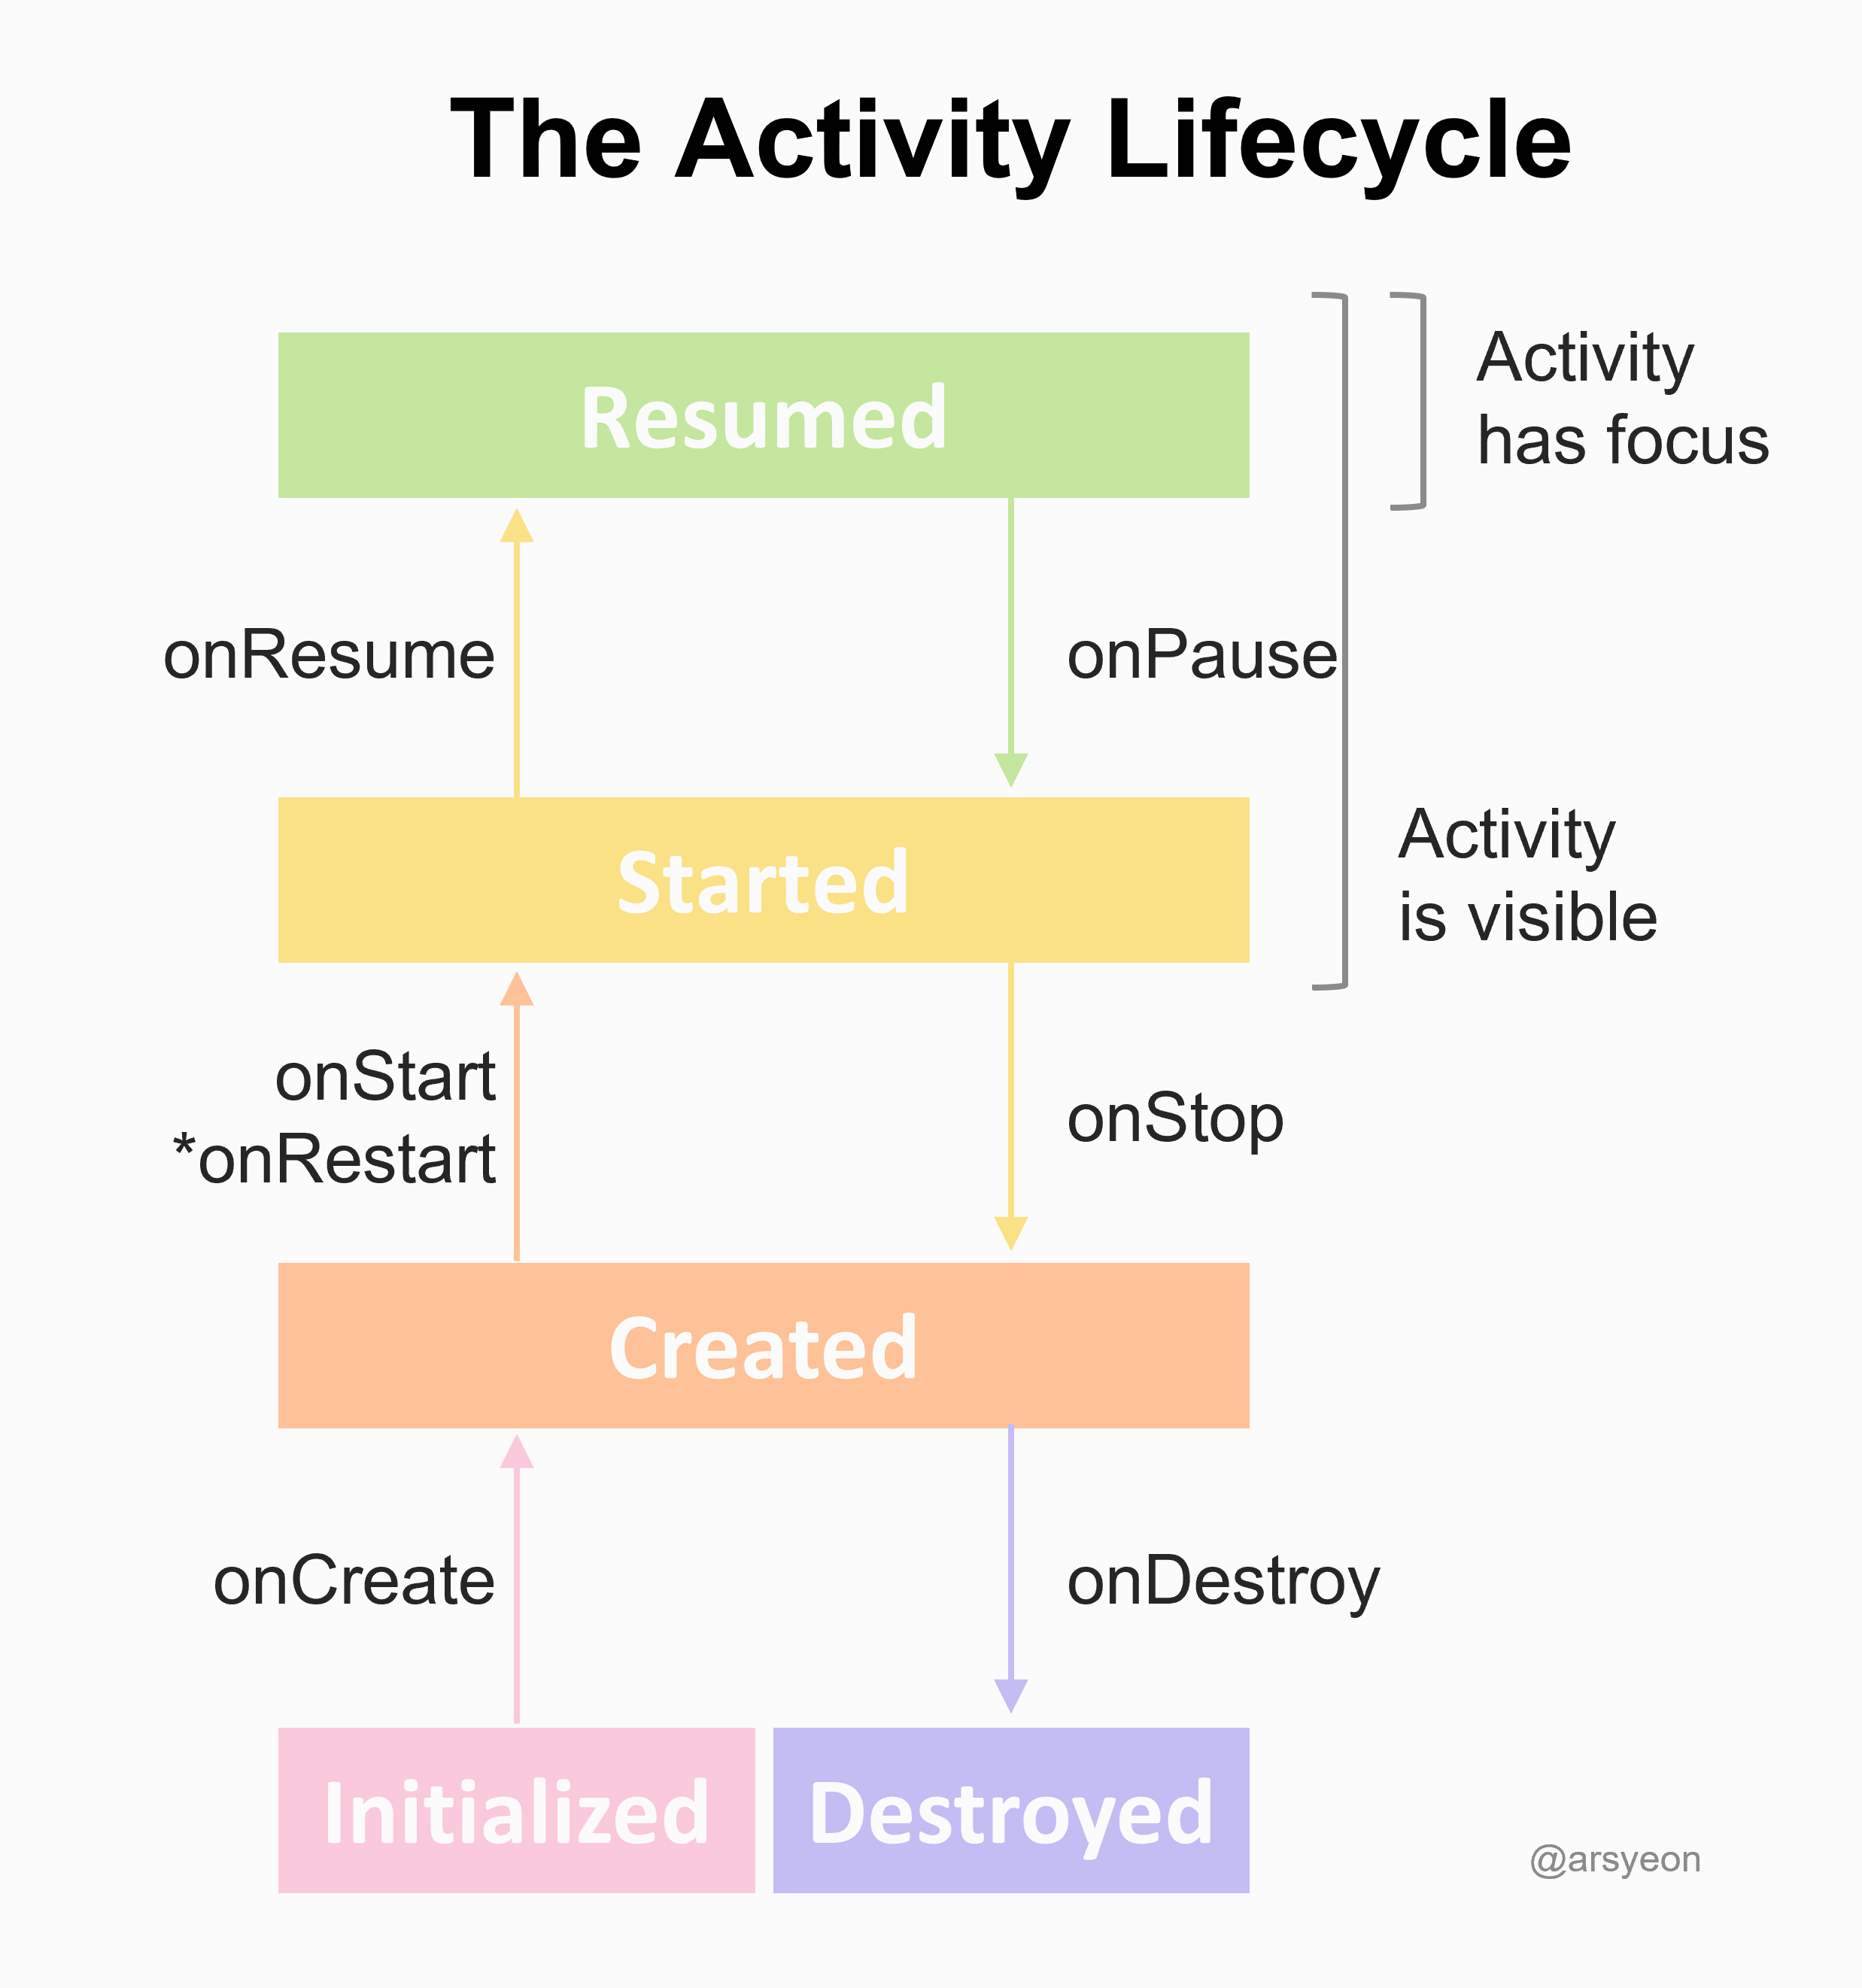 The Activitiy Lifecycle